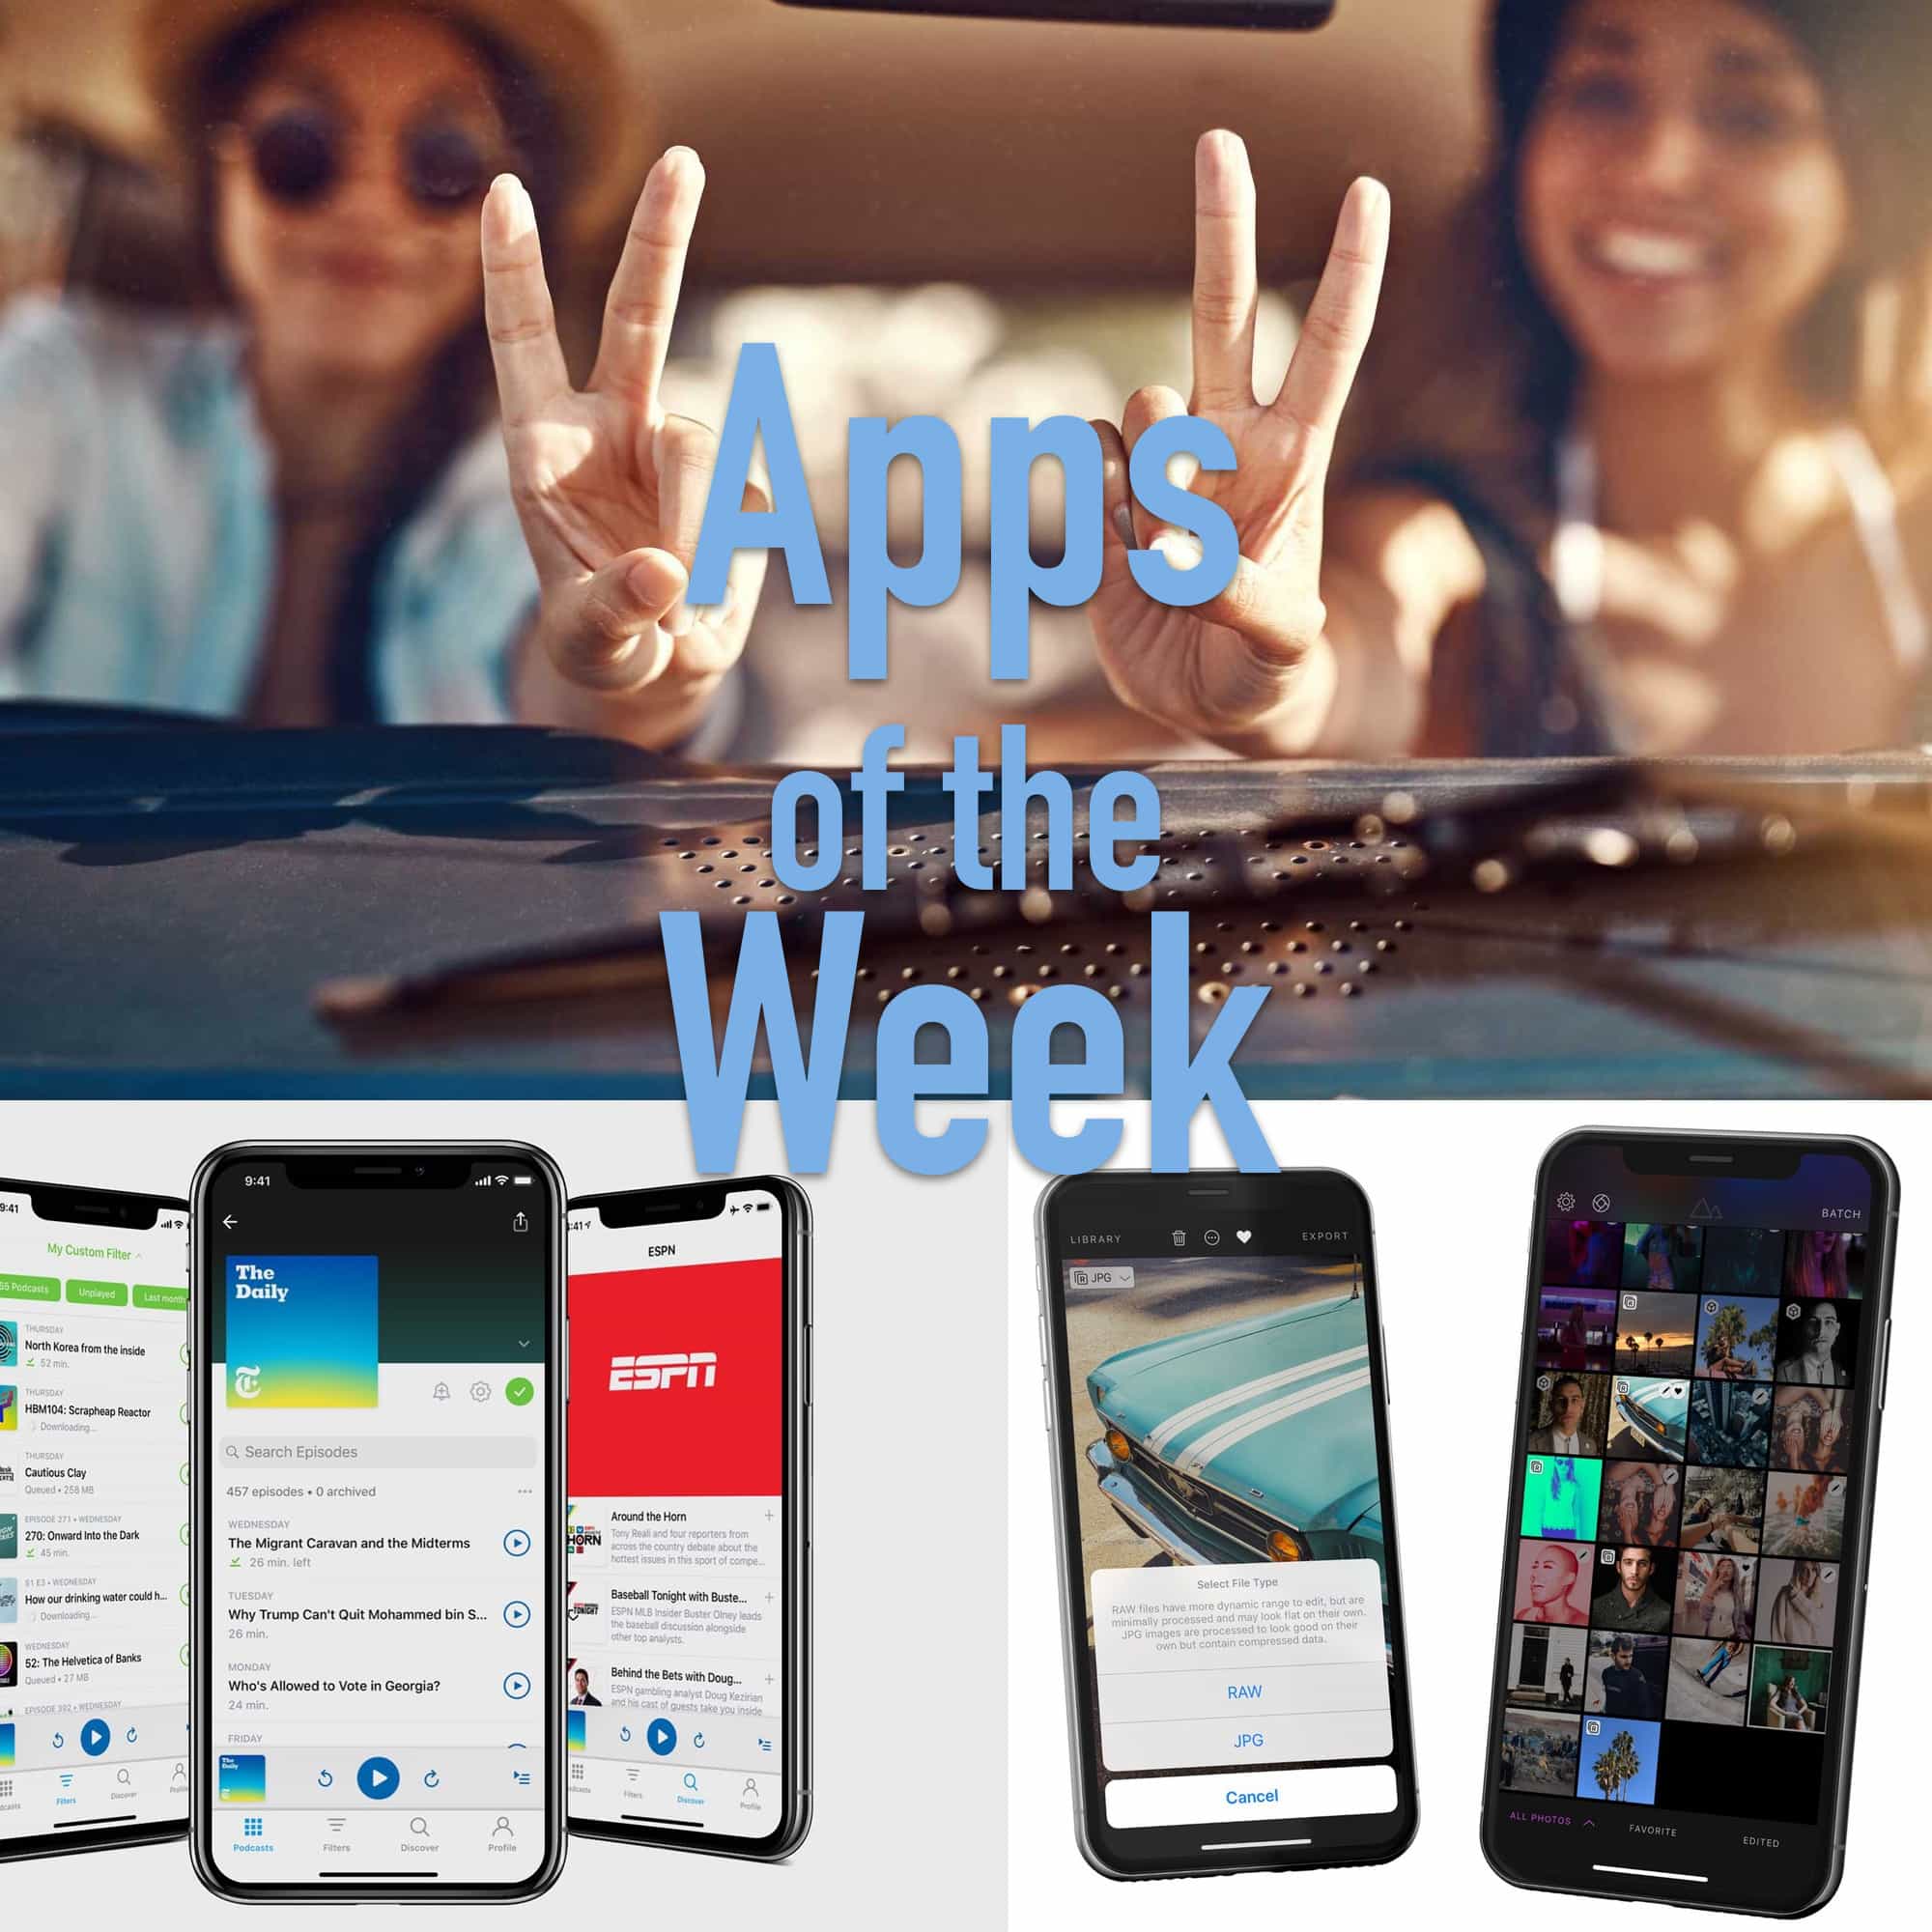 Check out this week's awesome app roundup